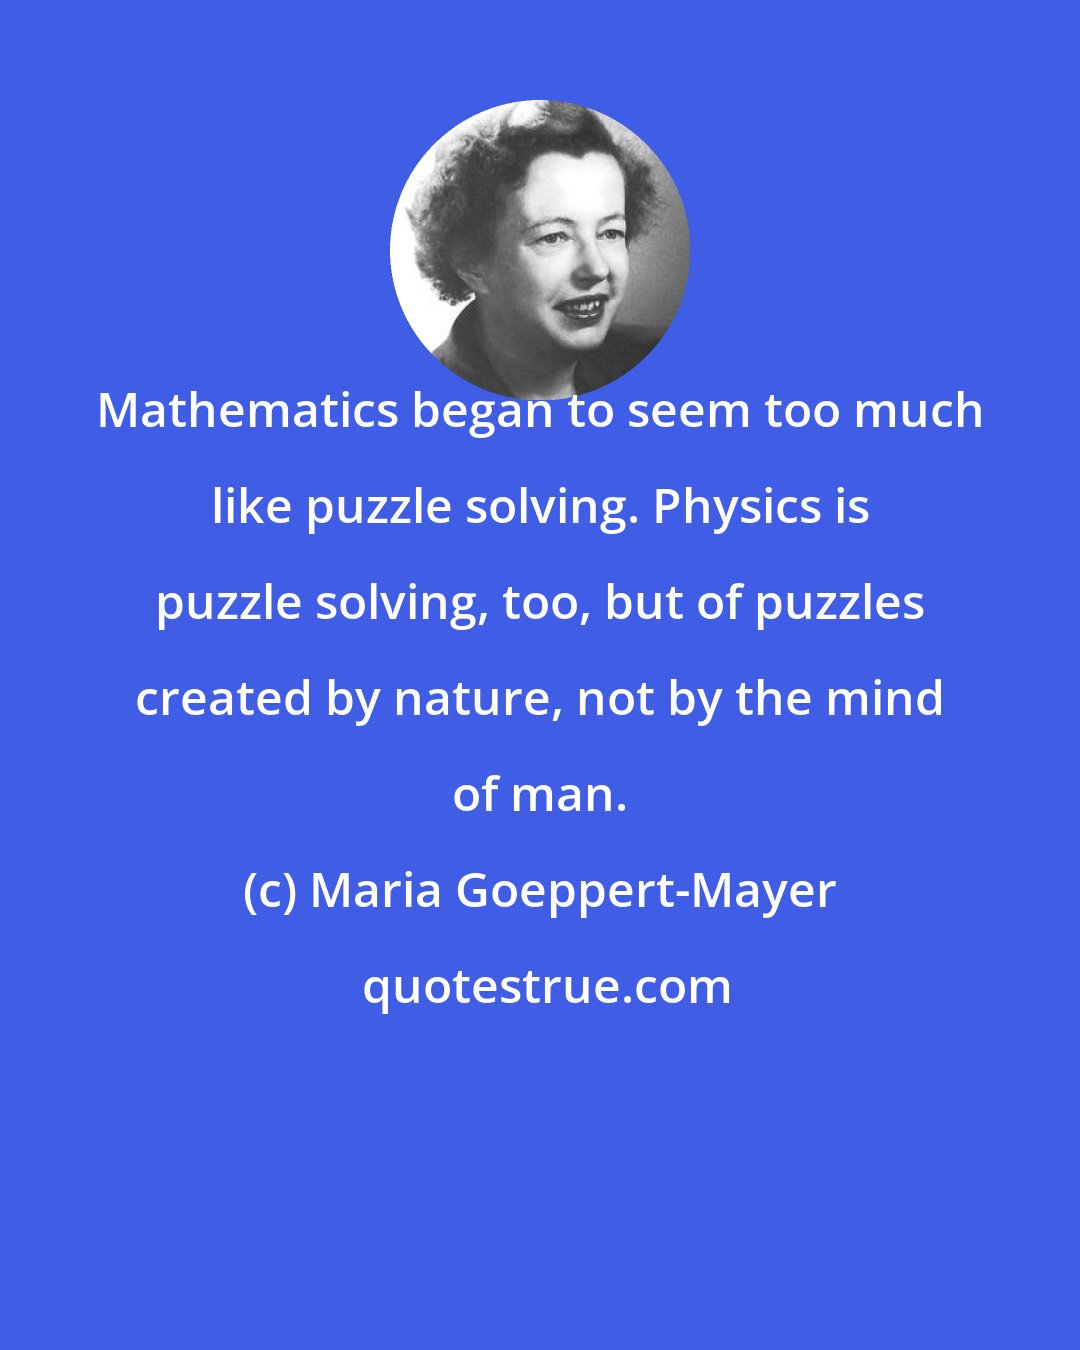 Maria Goeppert-Mayer: Mathematics began to seem too much like puzzle solving. Physics is puzzle solving, too, but of puzzles created by nature, not by the mind of man.